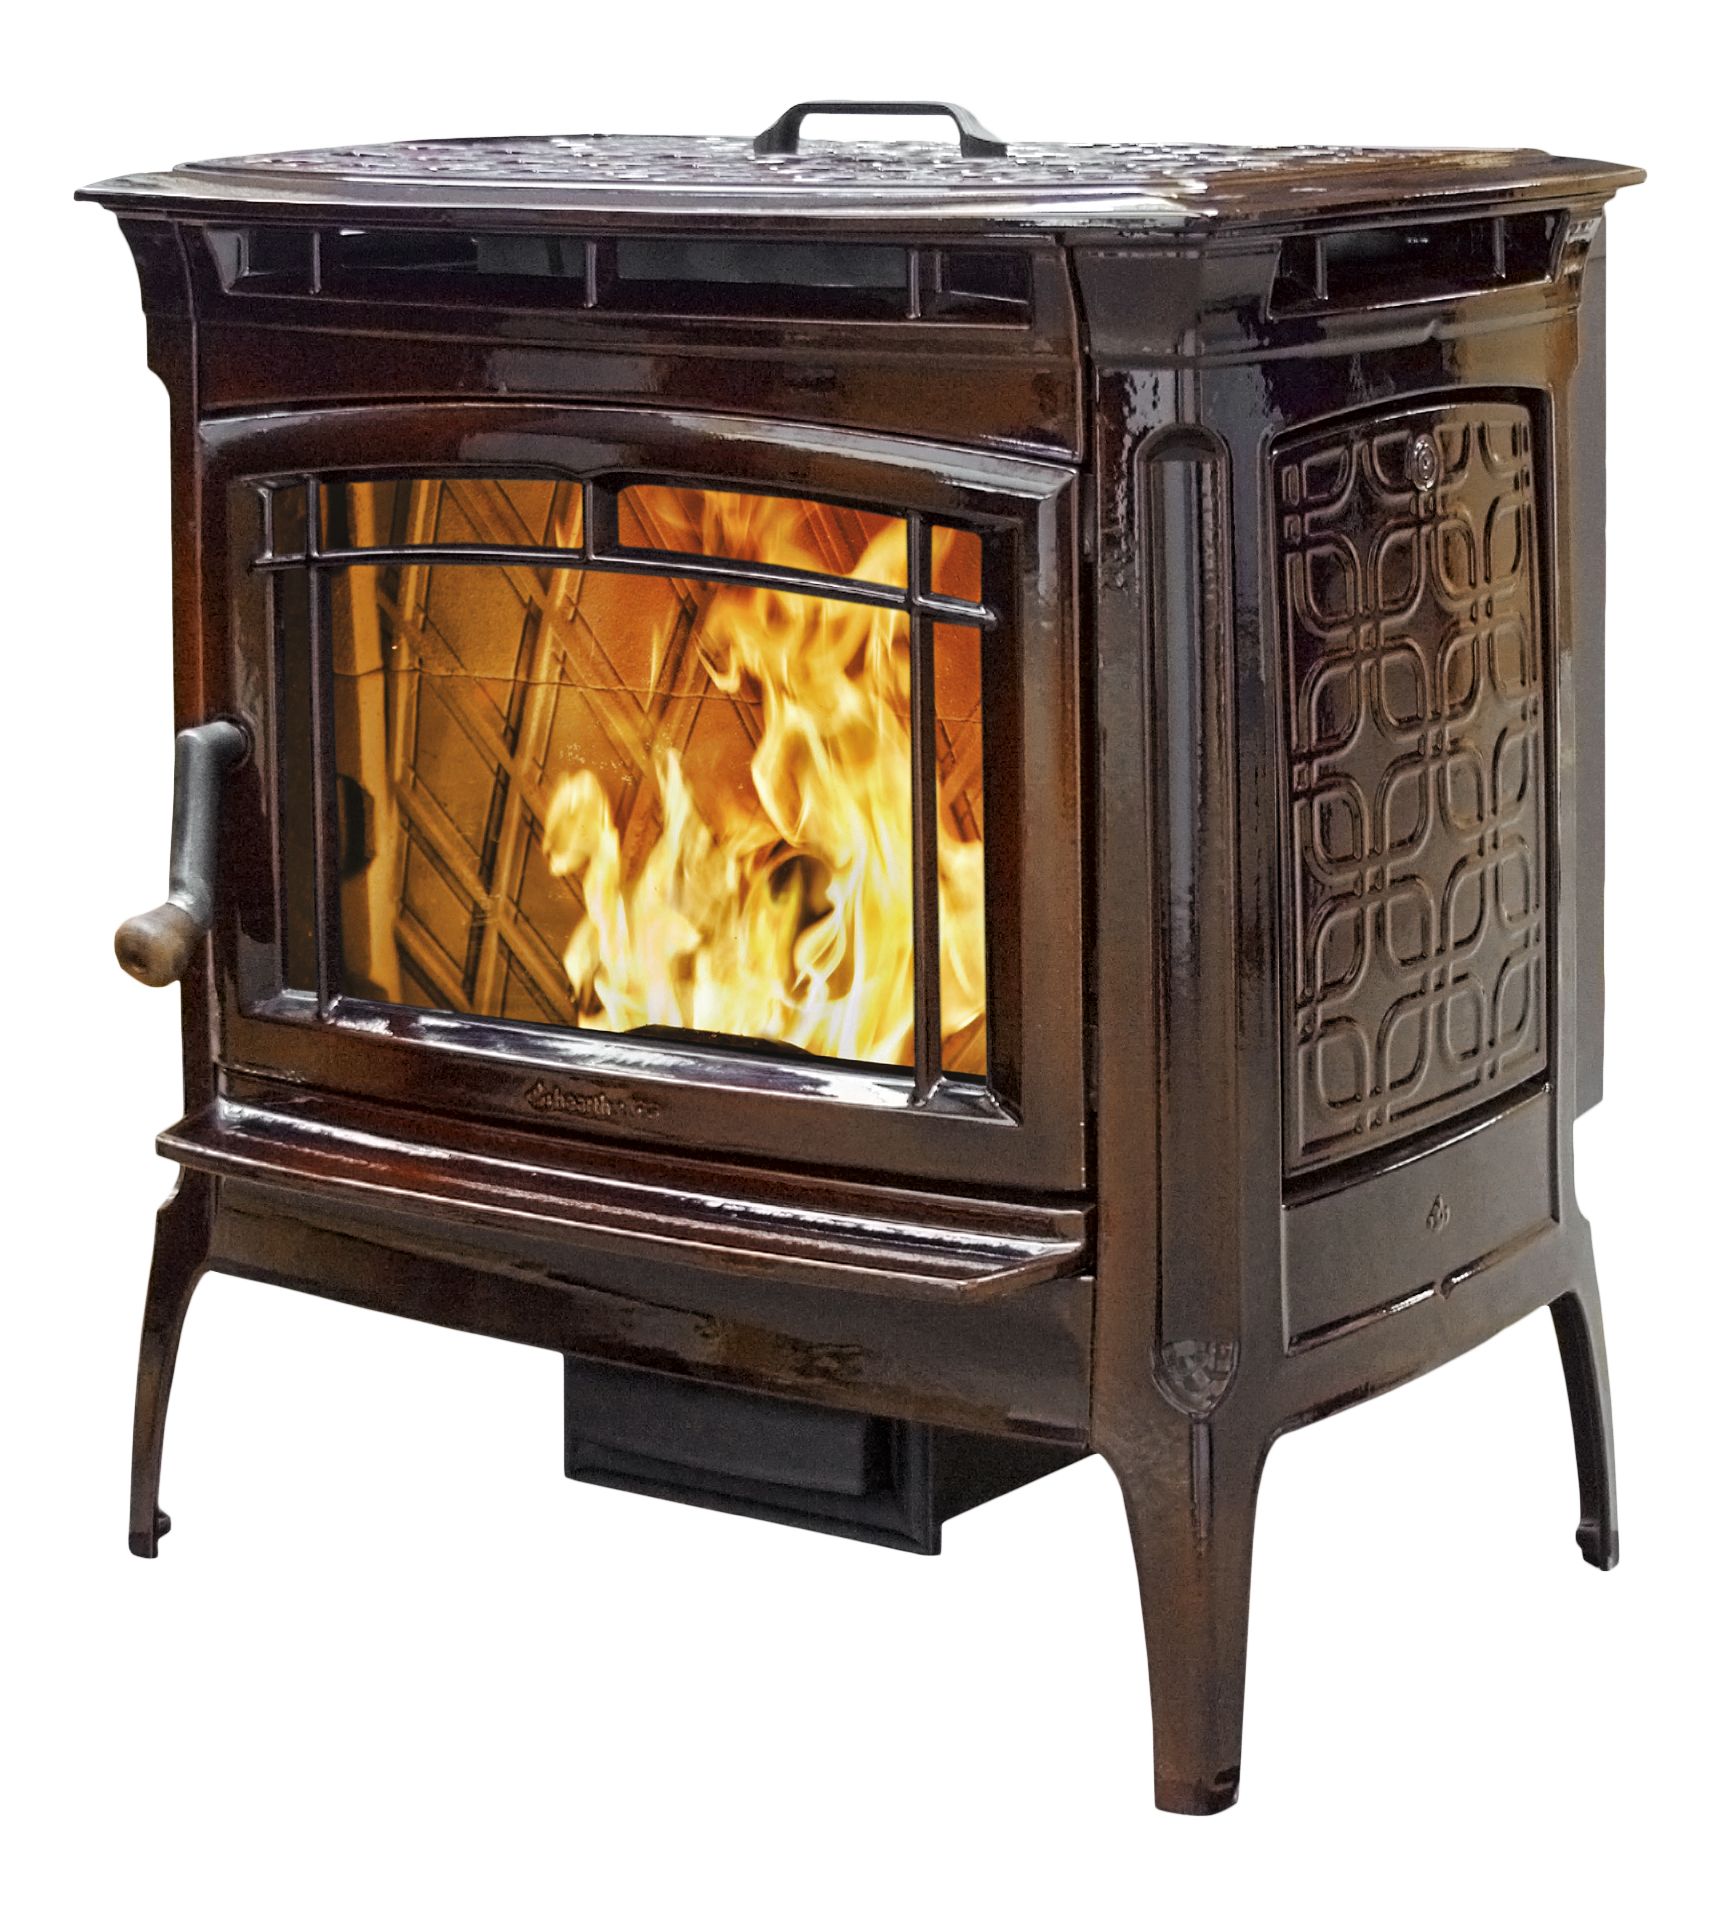 How to Install a Pellet Stove